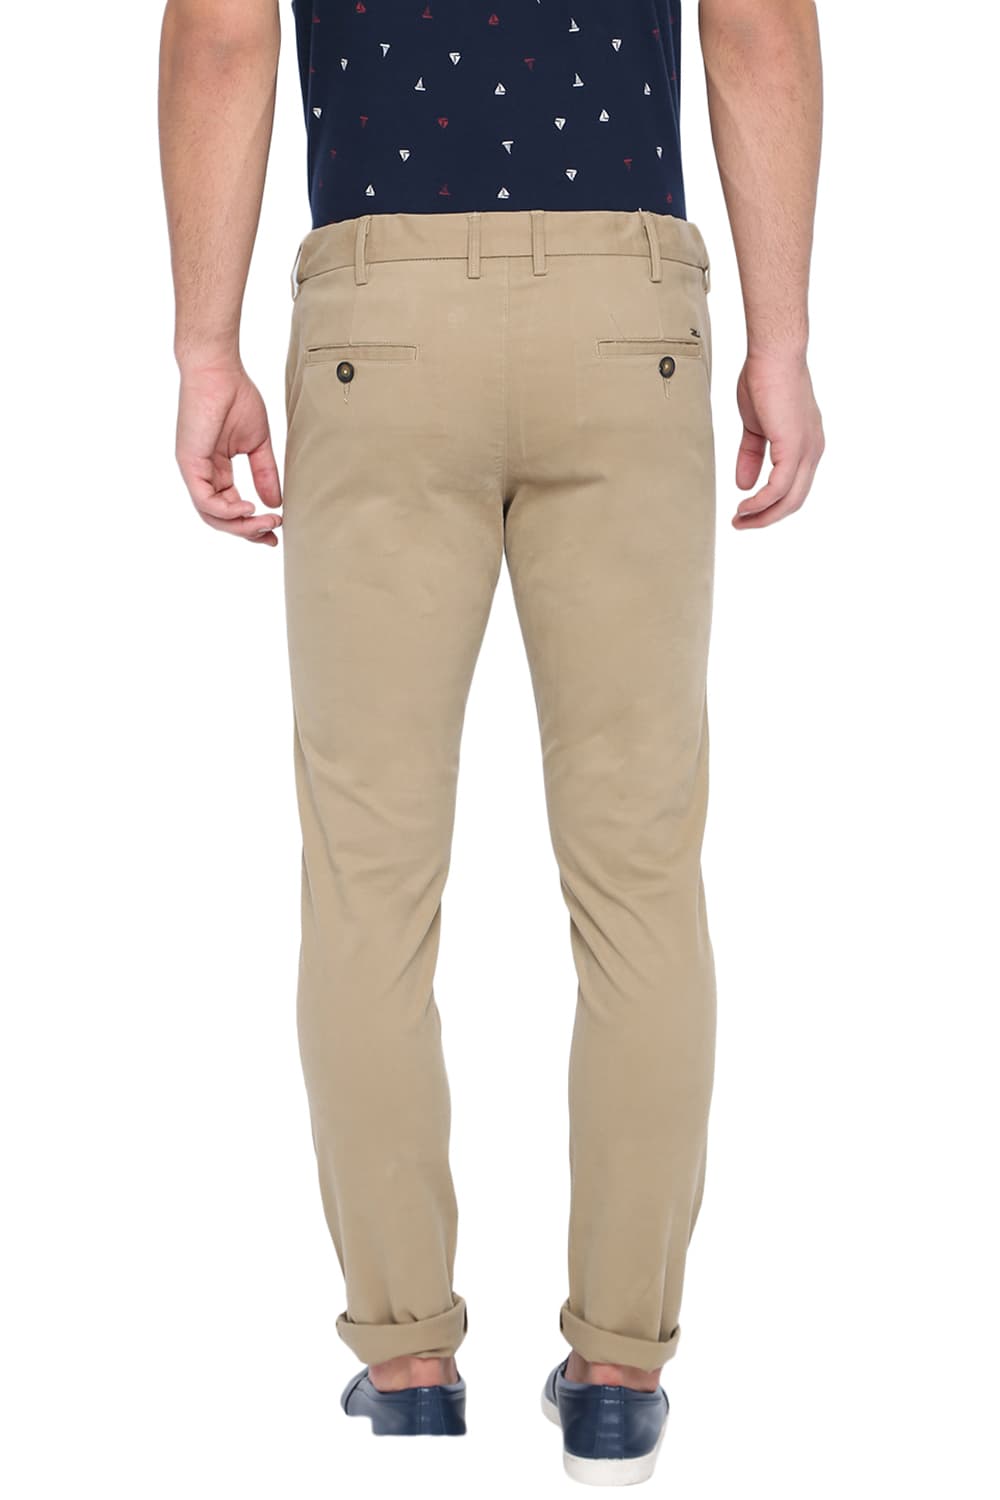 BASICS TAPERED FIT FAG STRETCH TROUSER